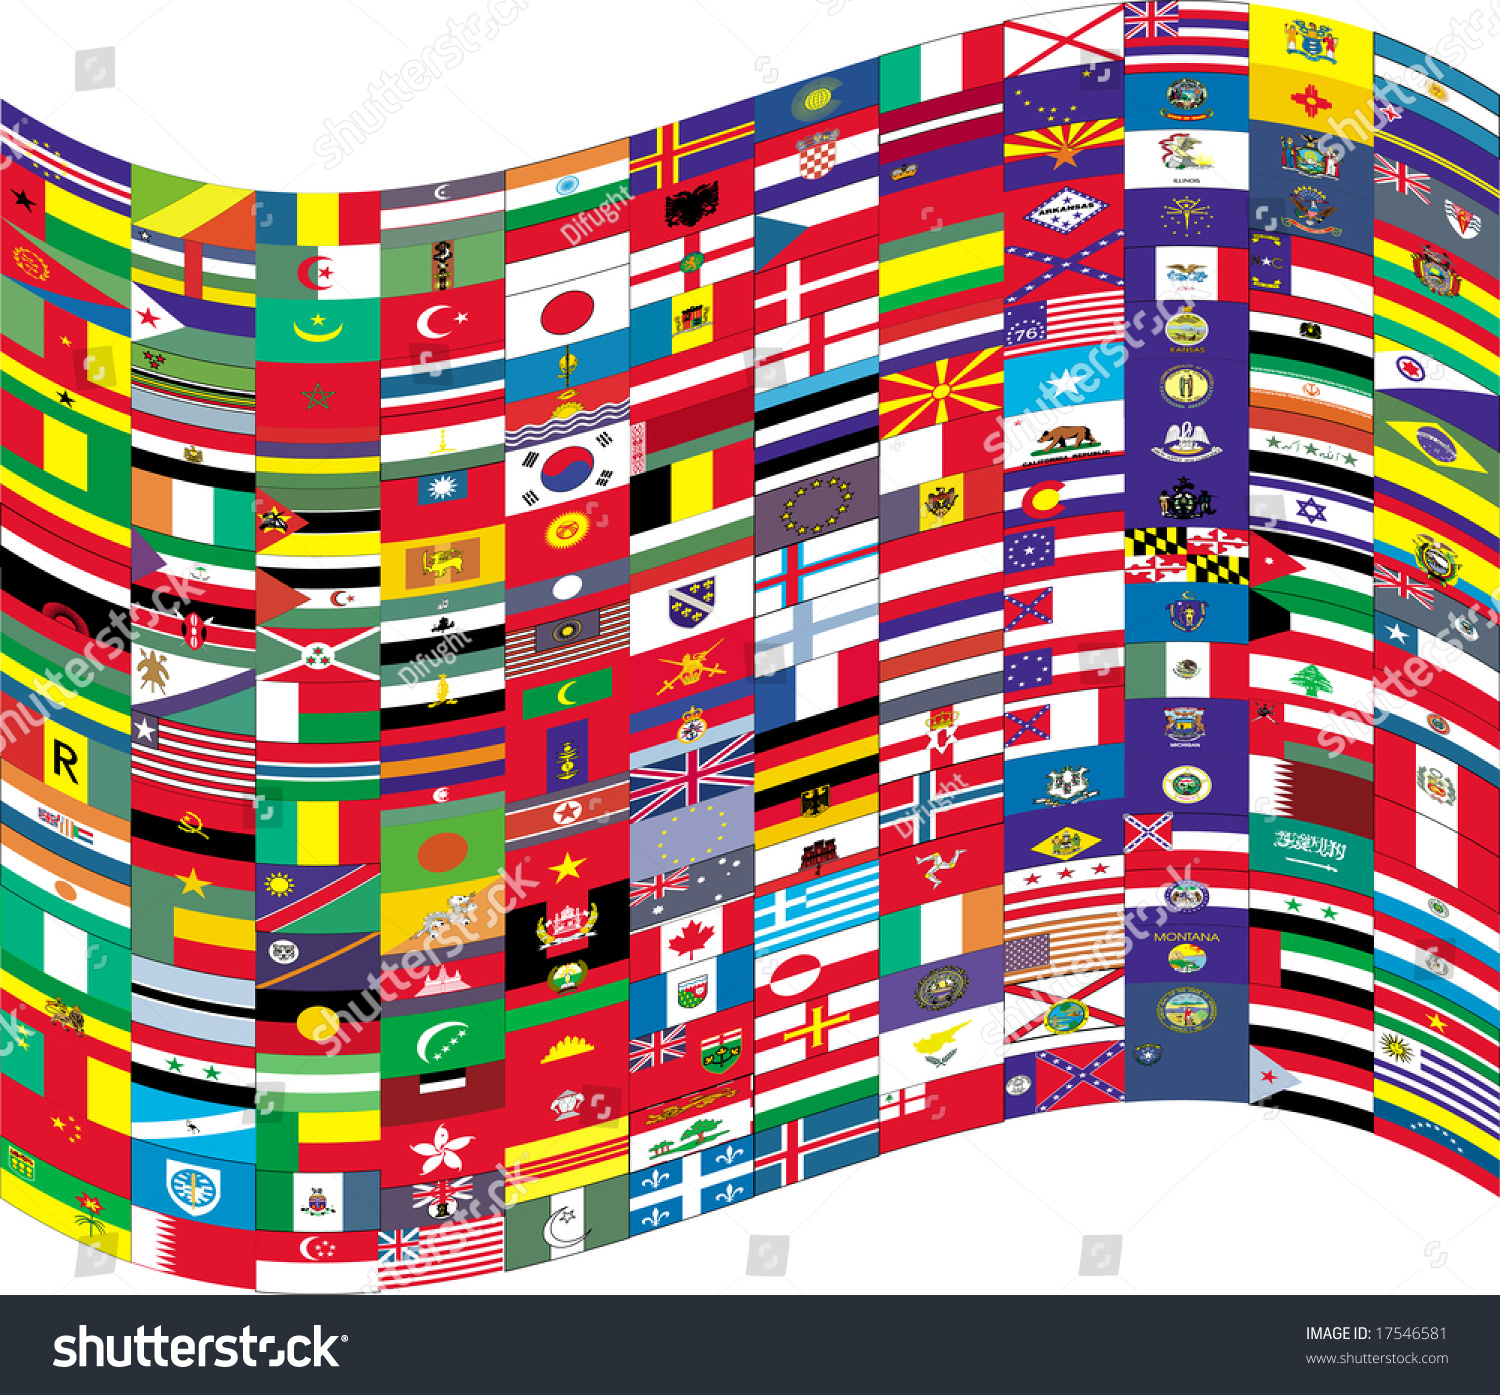 Big Flag Small Flags Stock Vector 17546581 - Shutterstock